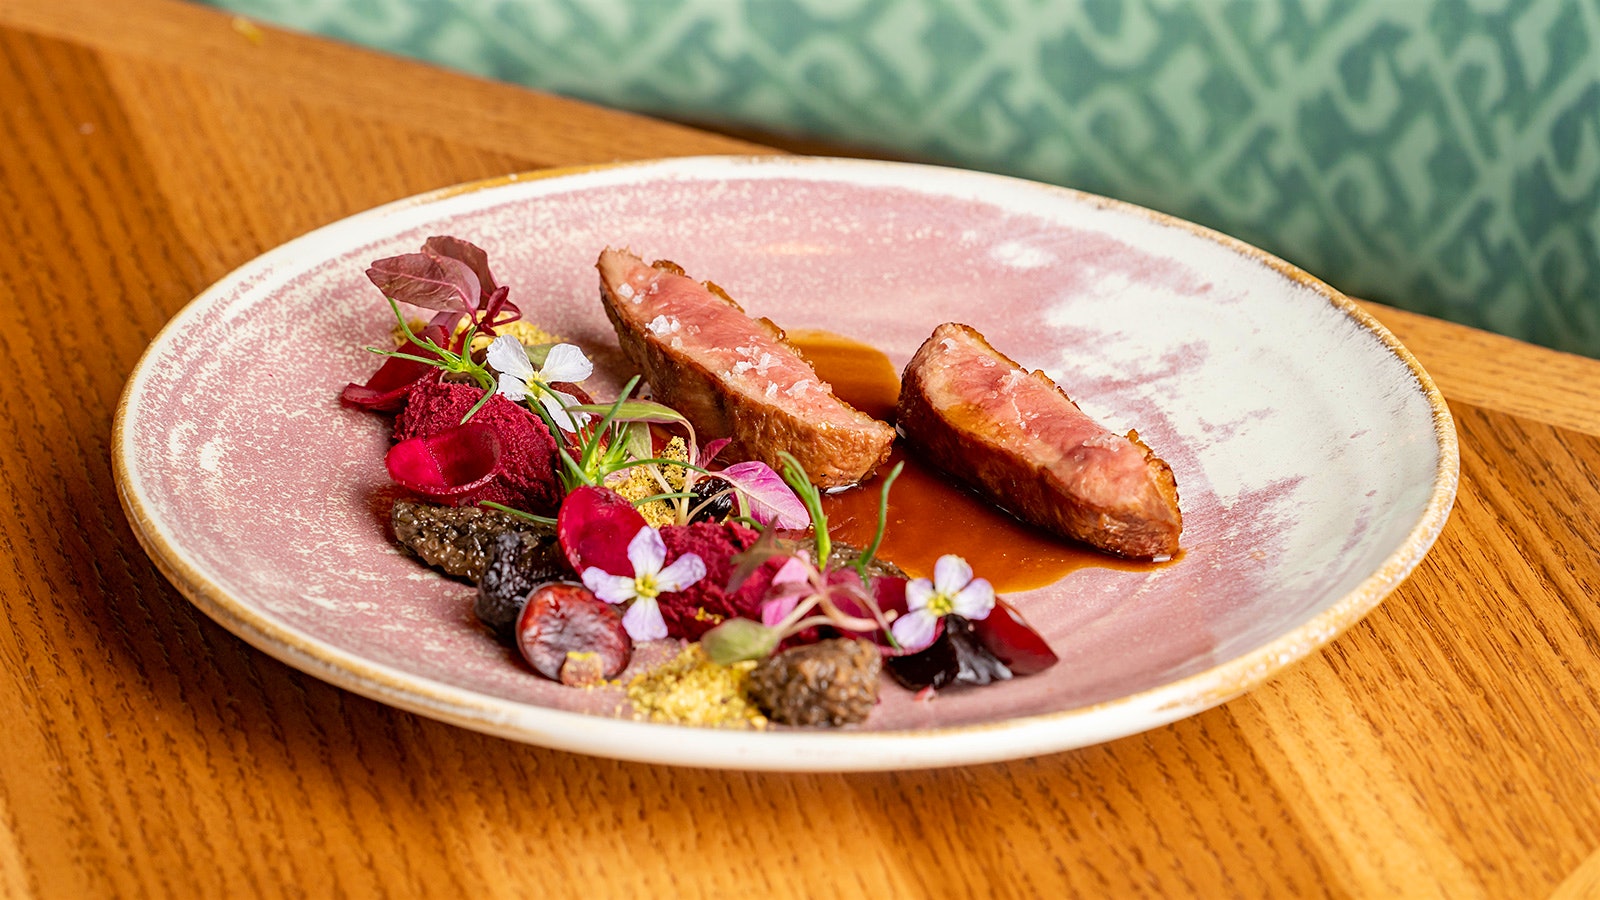  A beautifully plated dish of roasted Peking duck breast with beets, Bing cherries, Sierra morels and hazelnut dukkah